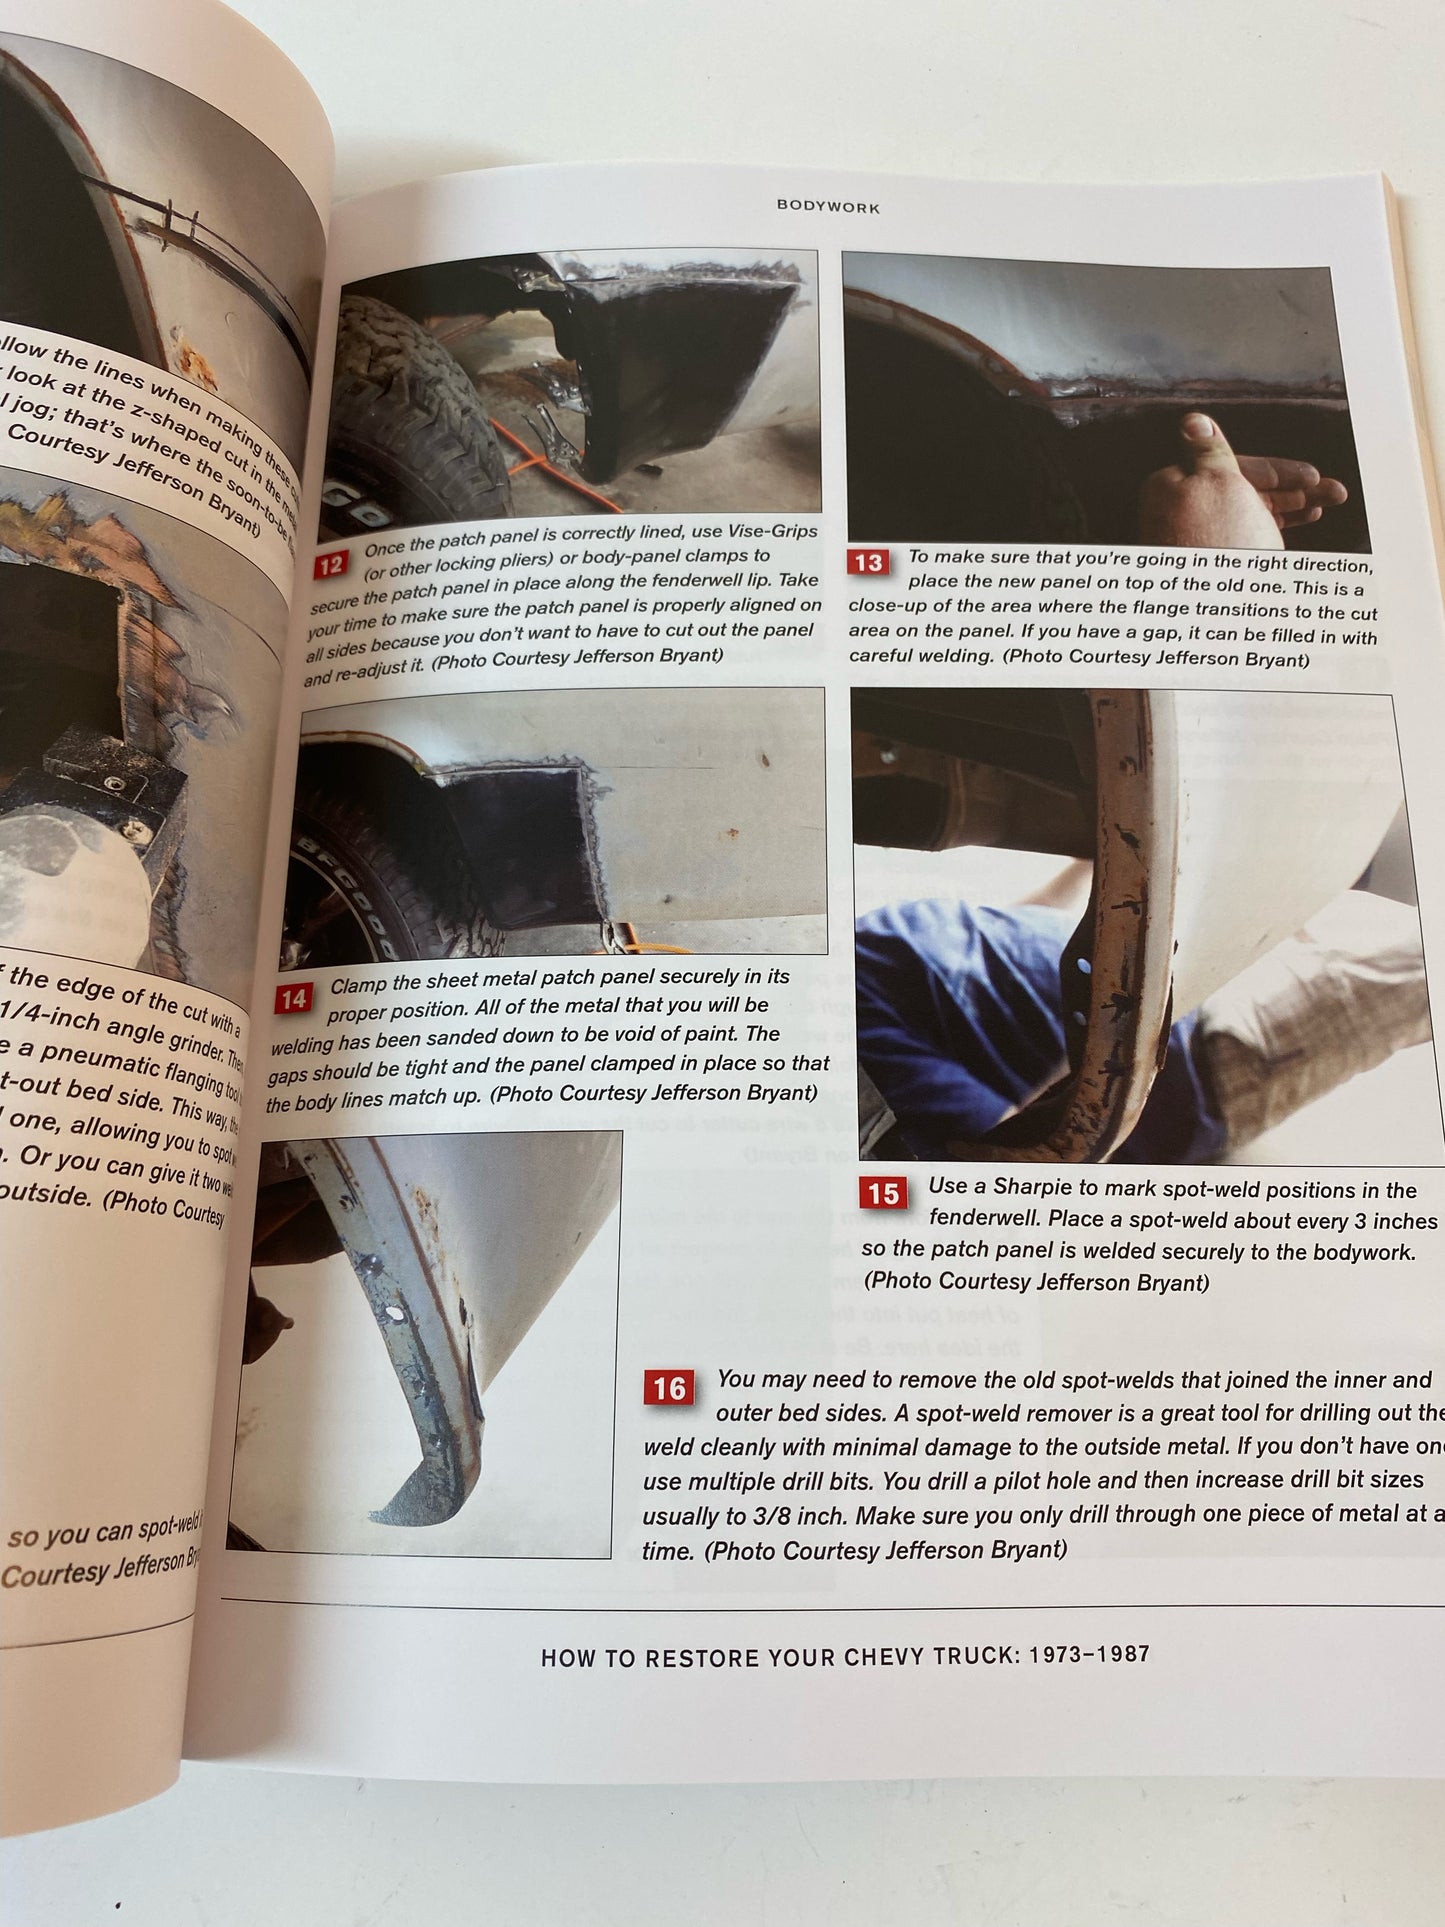 How to Restore Your 1973 - 1987 Chevy Truck Restoration Guide